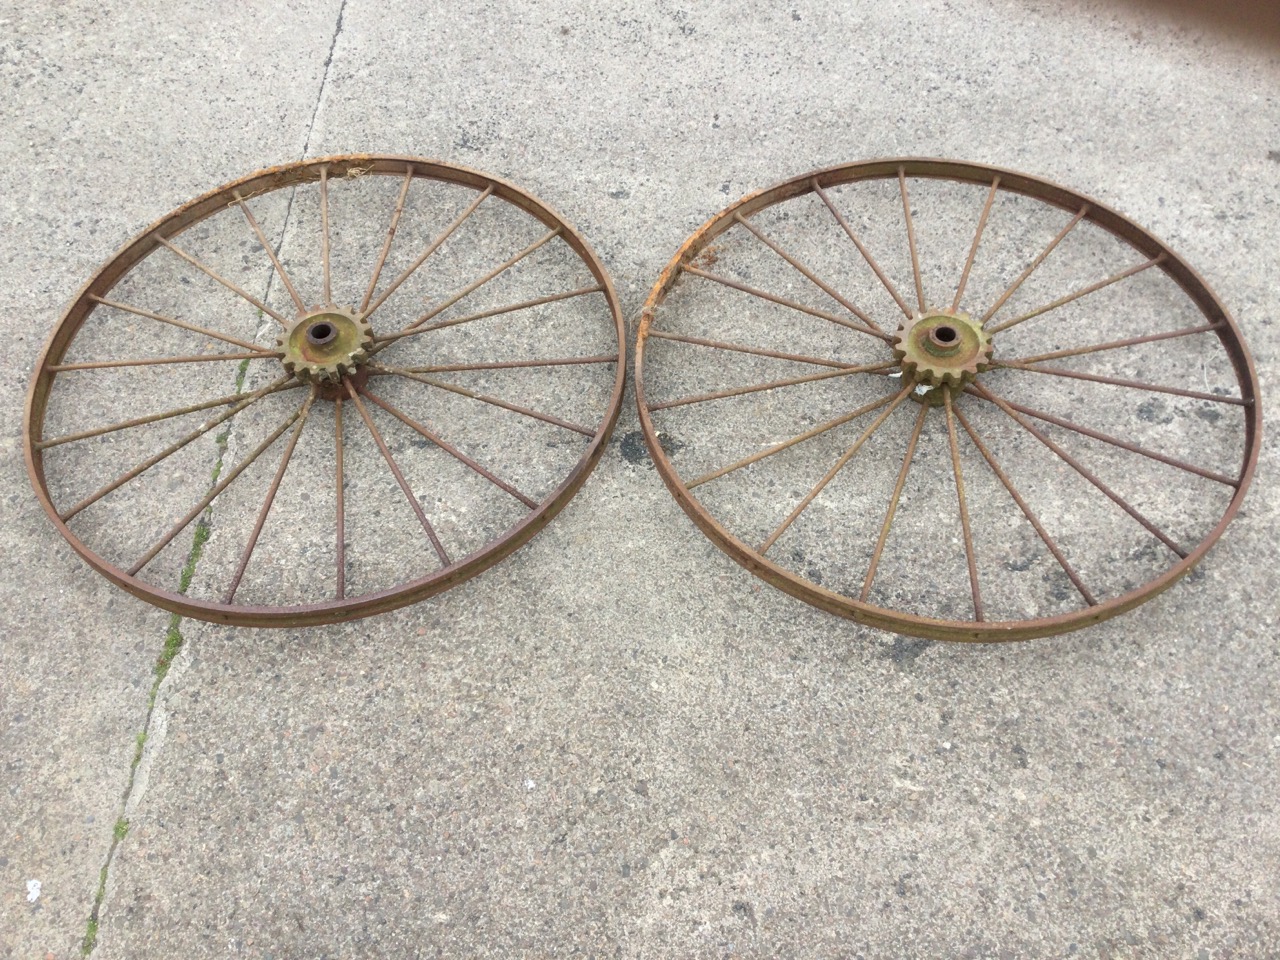 A pair of large agricultural wheels with channelled flat rims framing two sets of spokes with